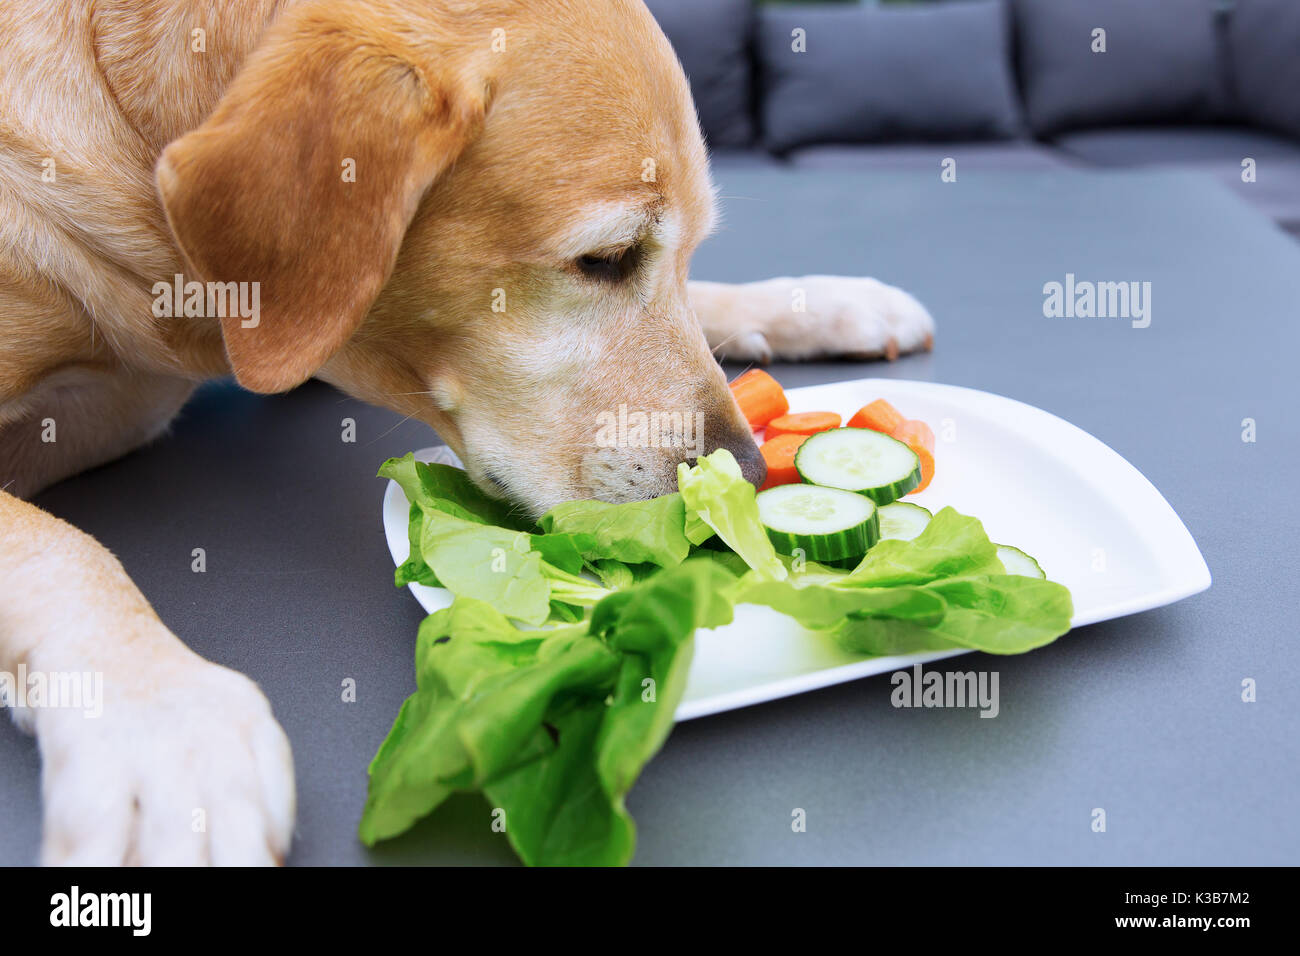 picture of a labrador retriever who eats vegetables from a plate Stock Photo